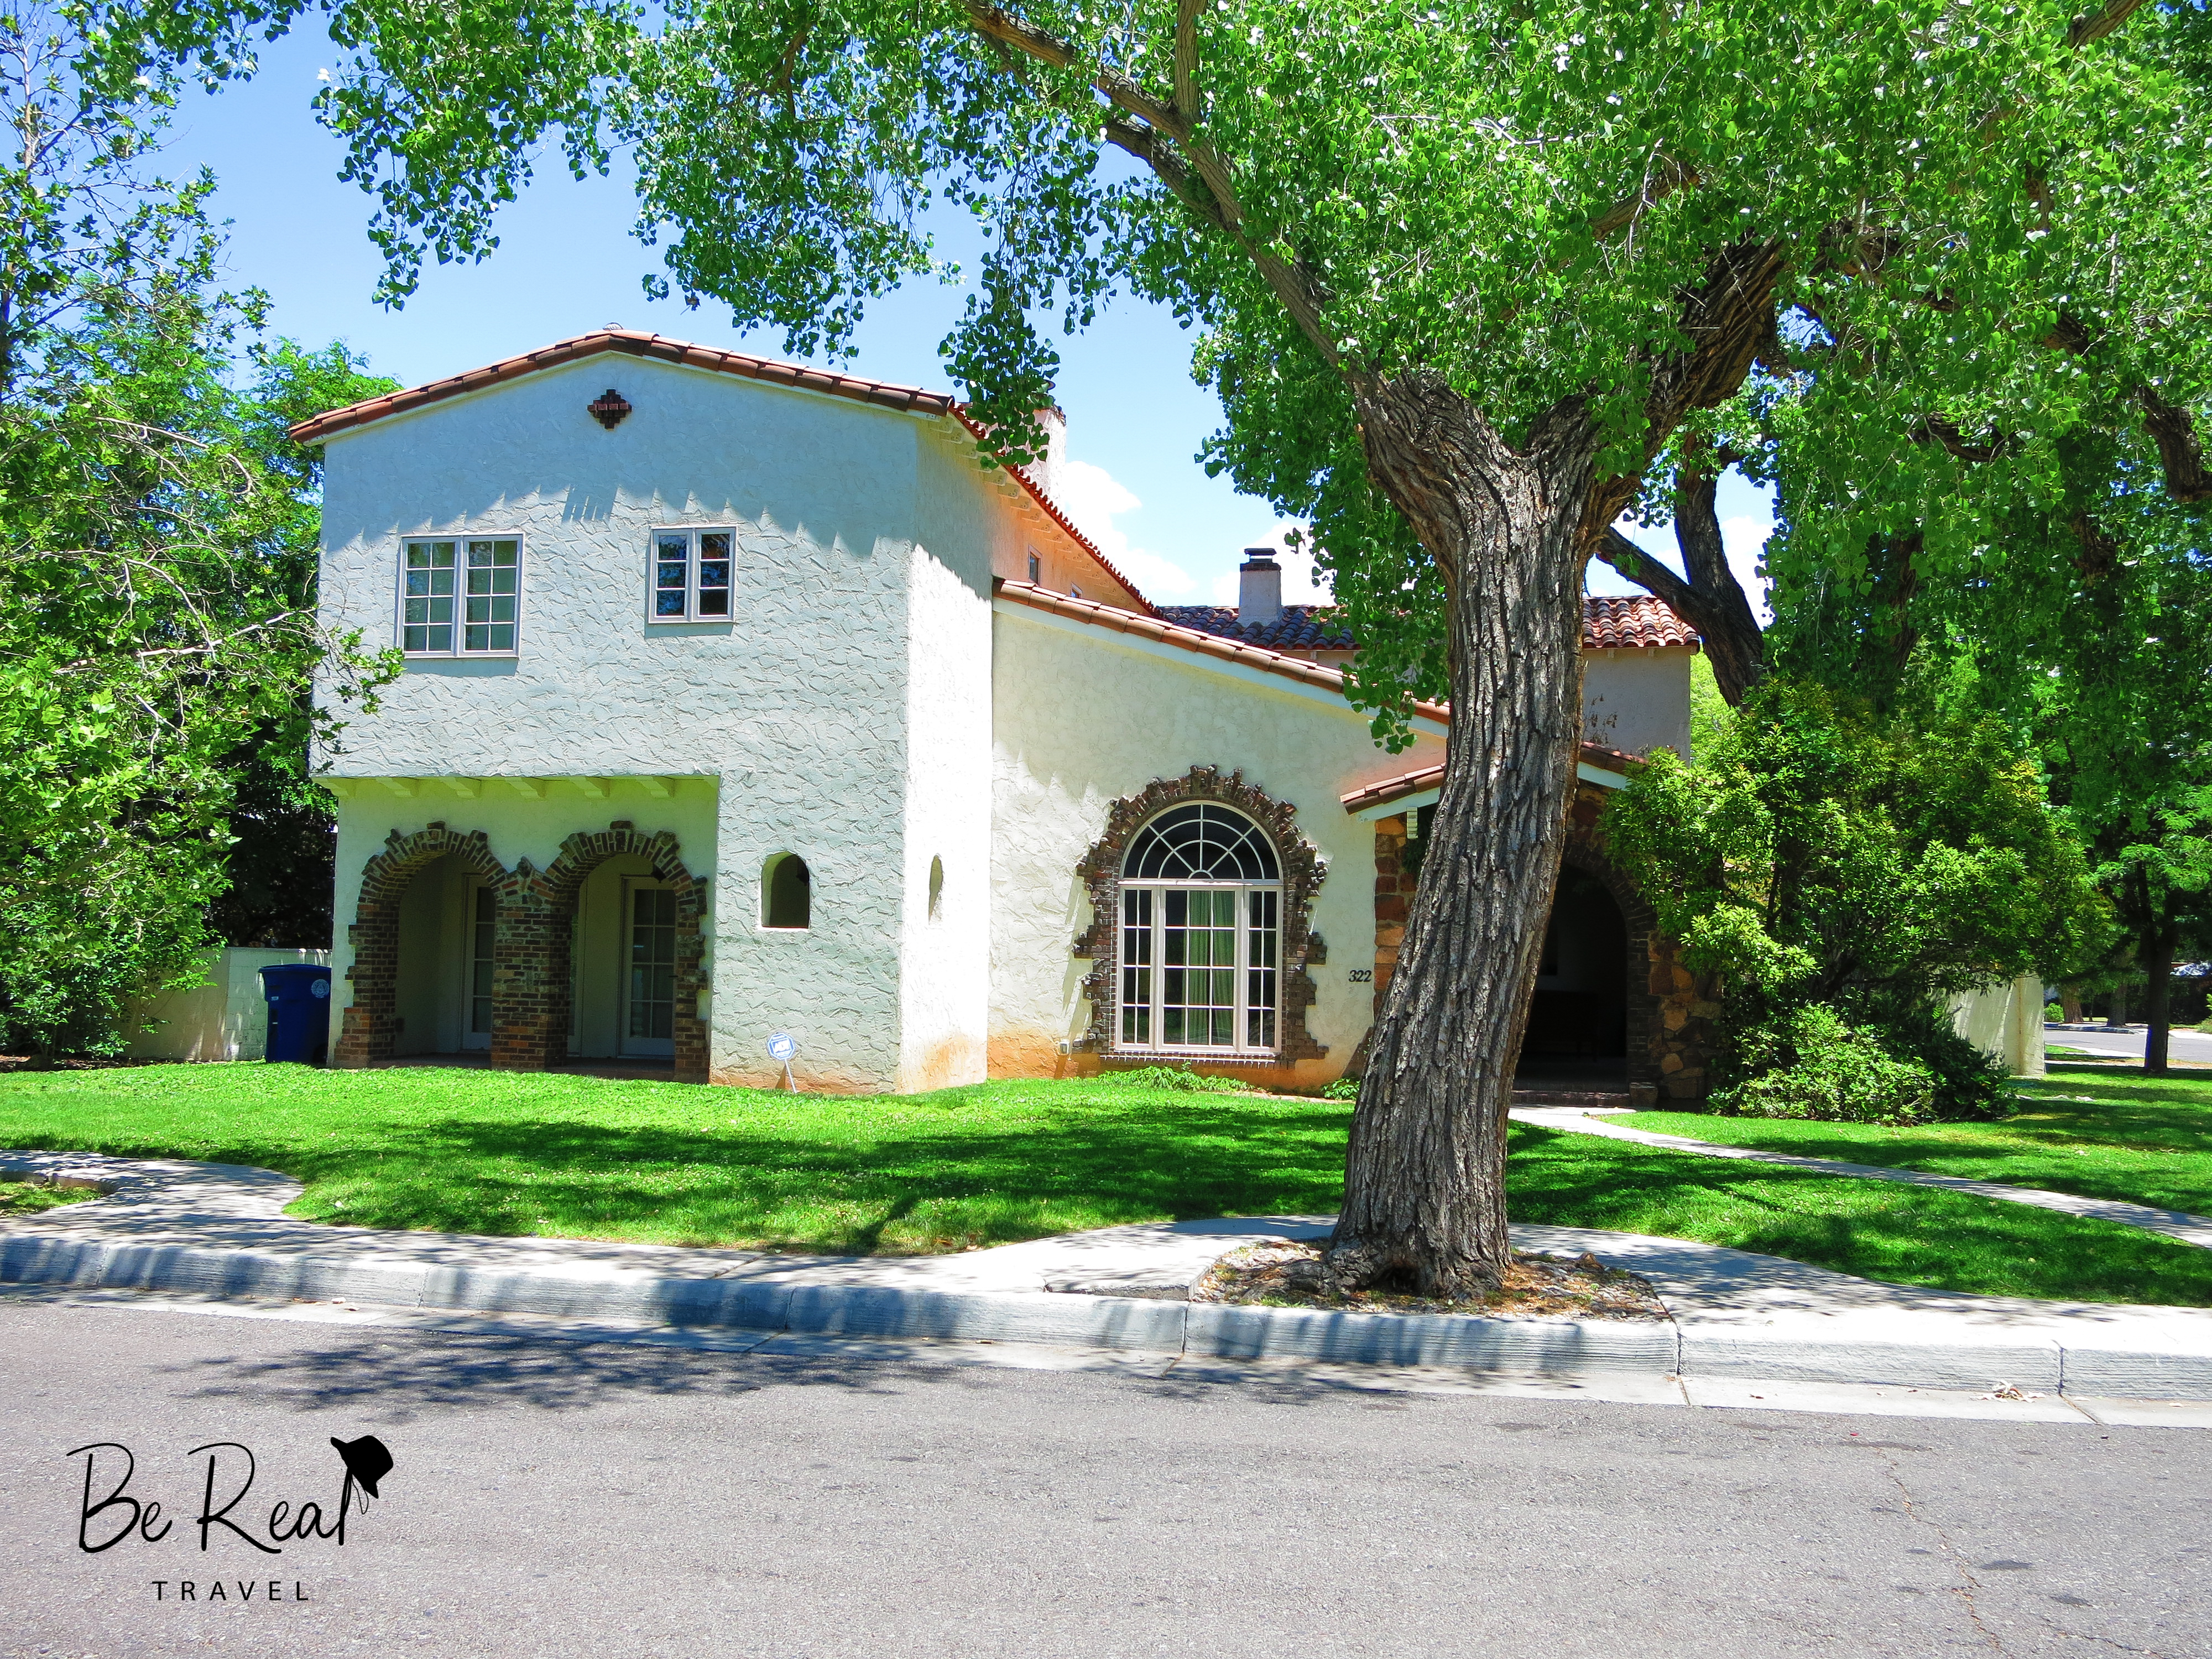 A two-story white house sits behind a large tree; this house was Jesse Pinkman's house in New Mexico Breaking Bad